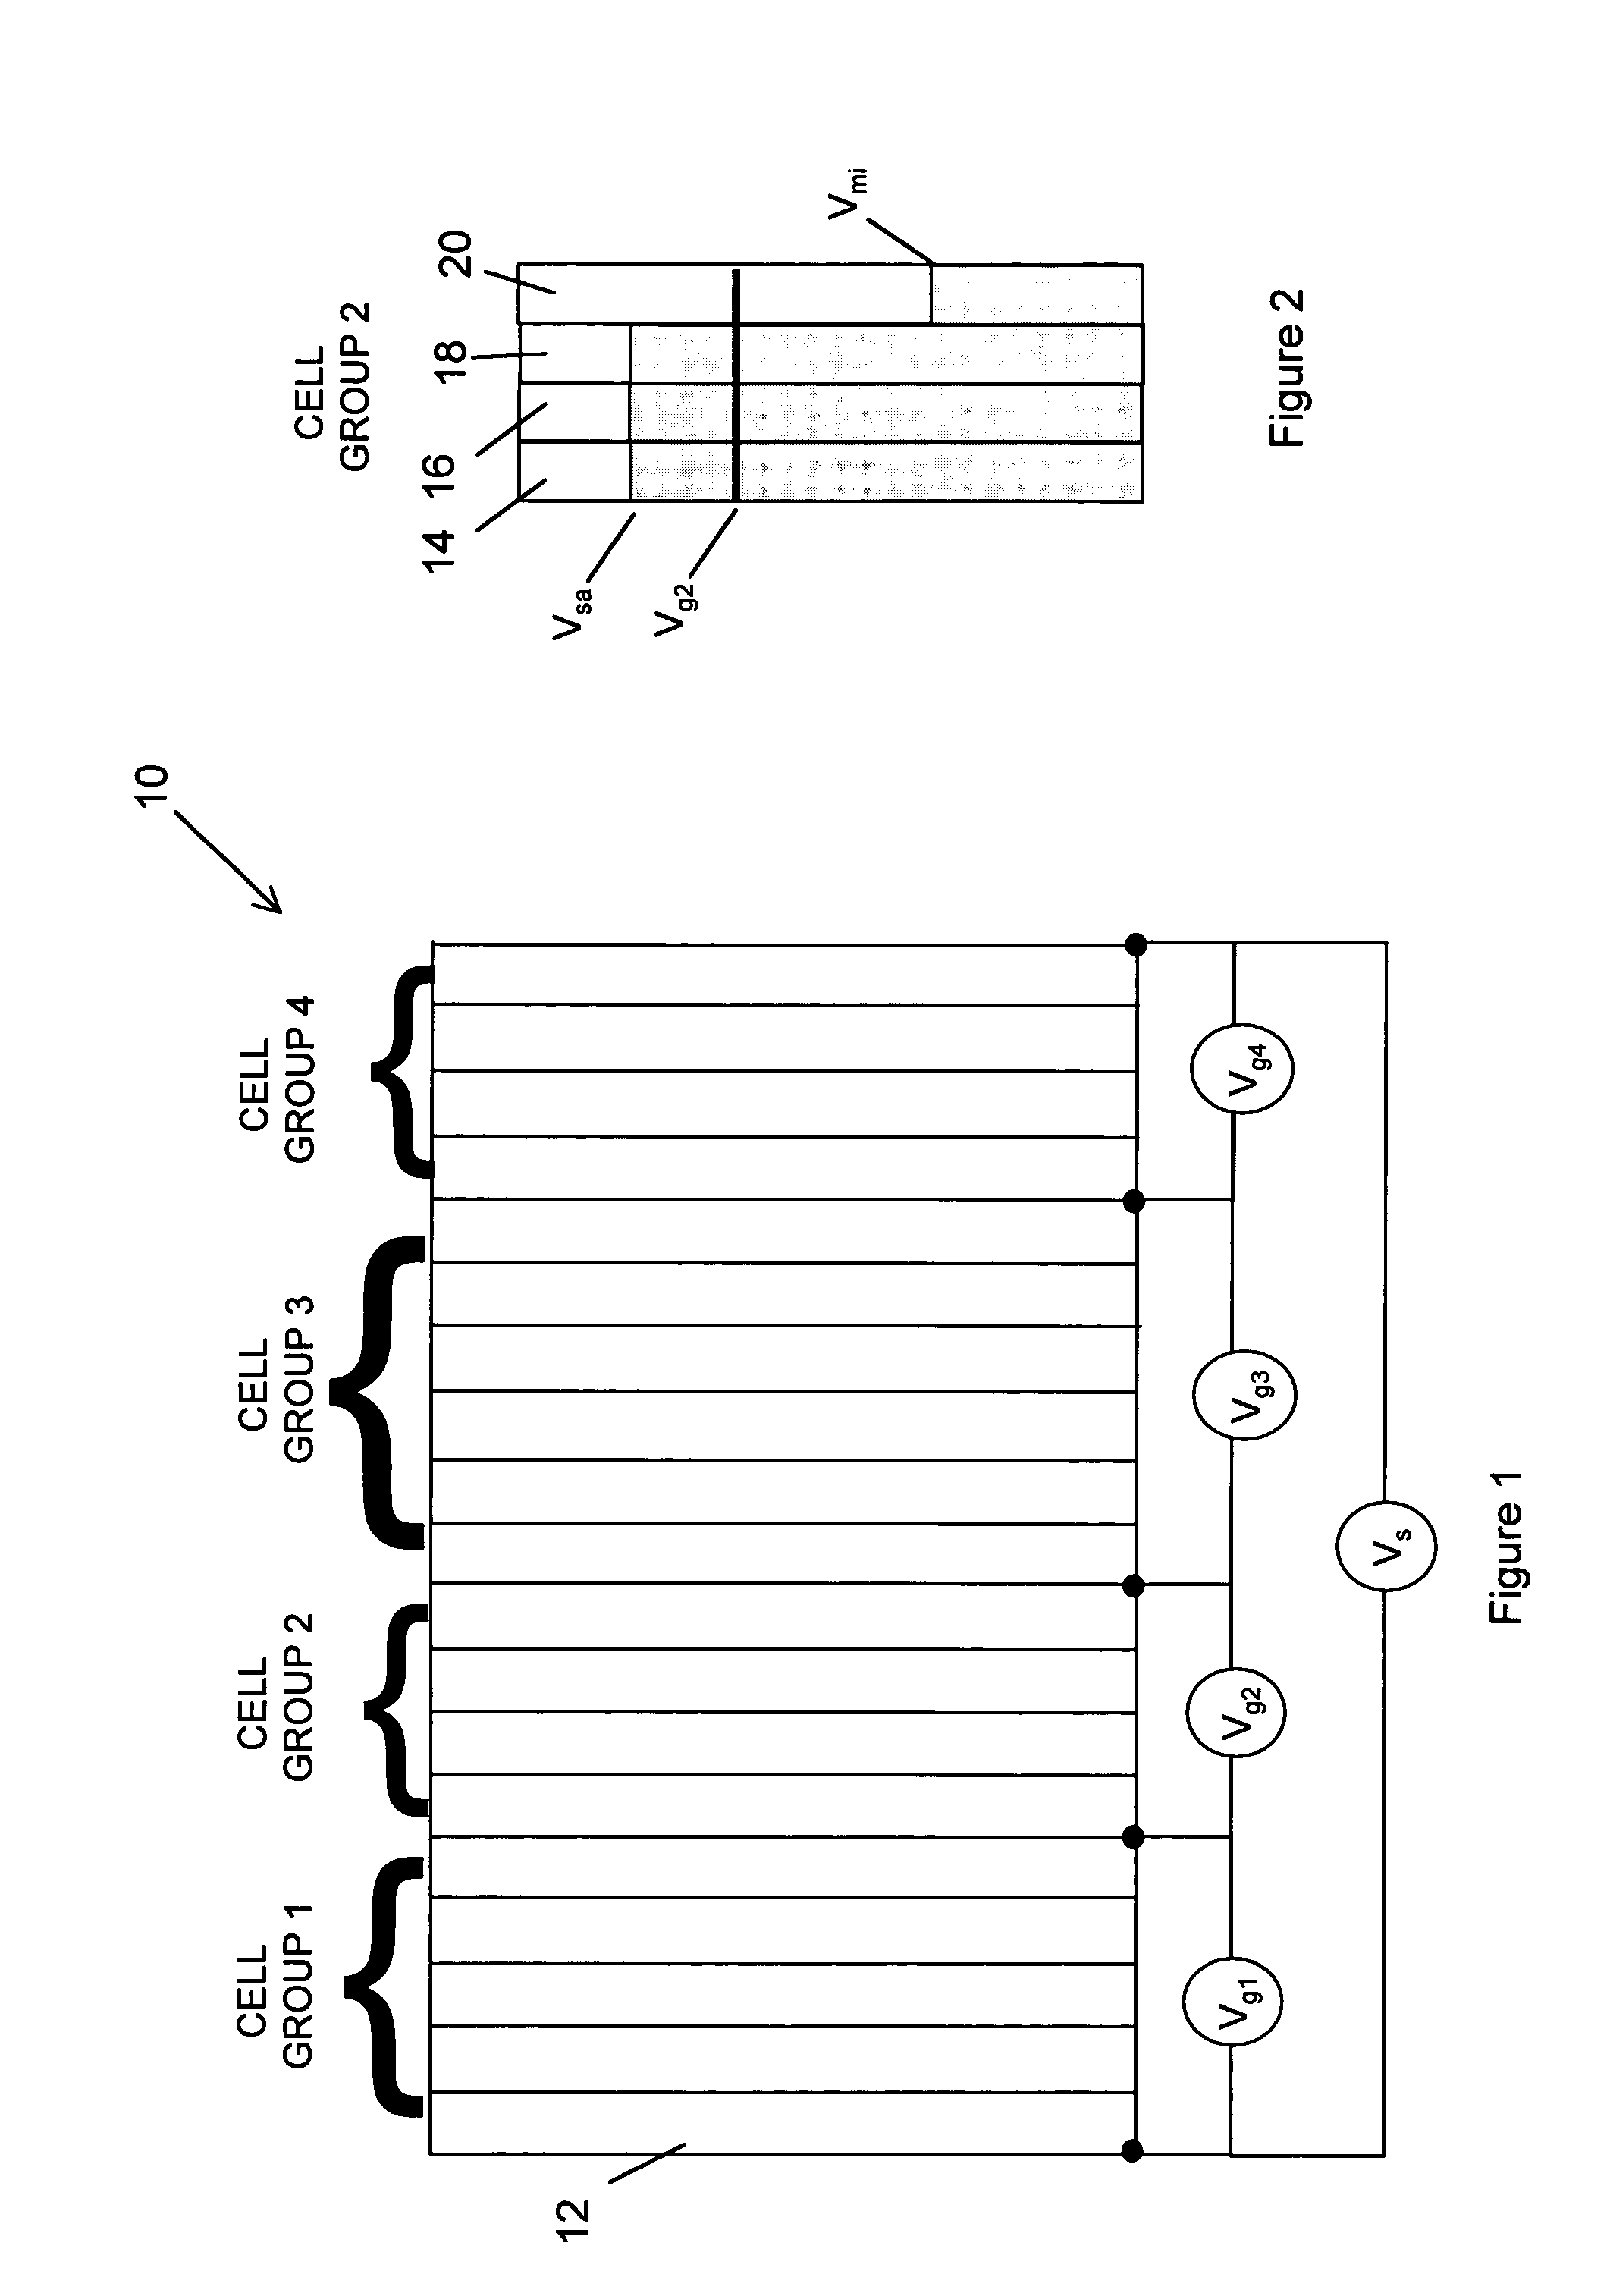 Method and apparatus for monitoring fuel cell voltages